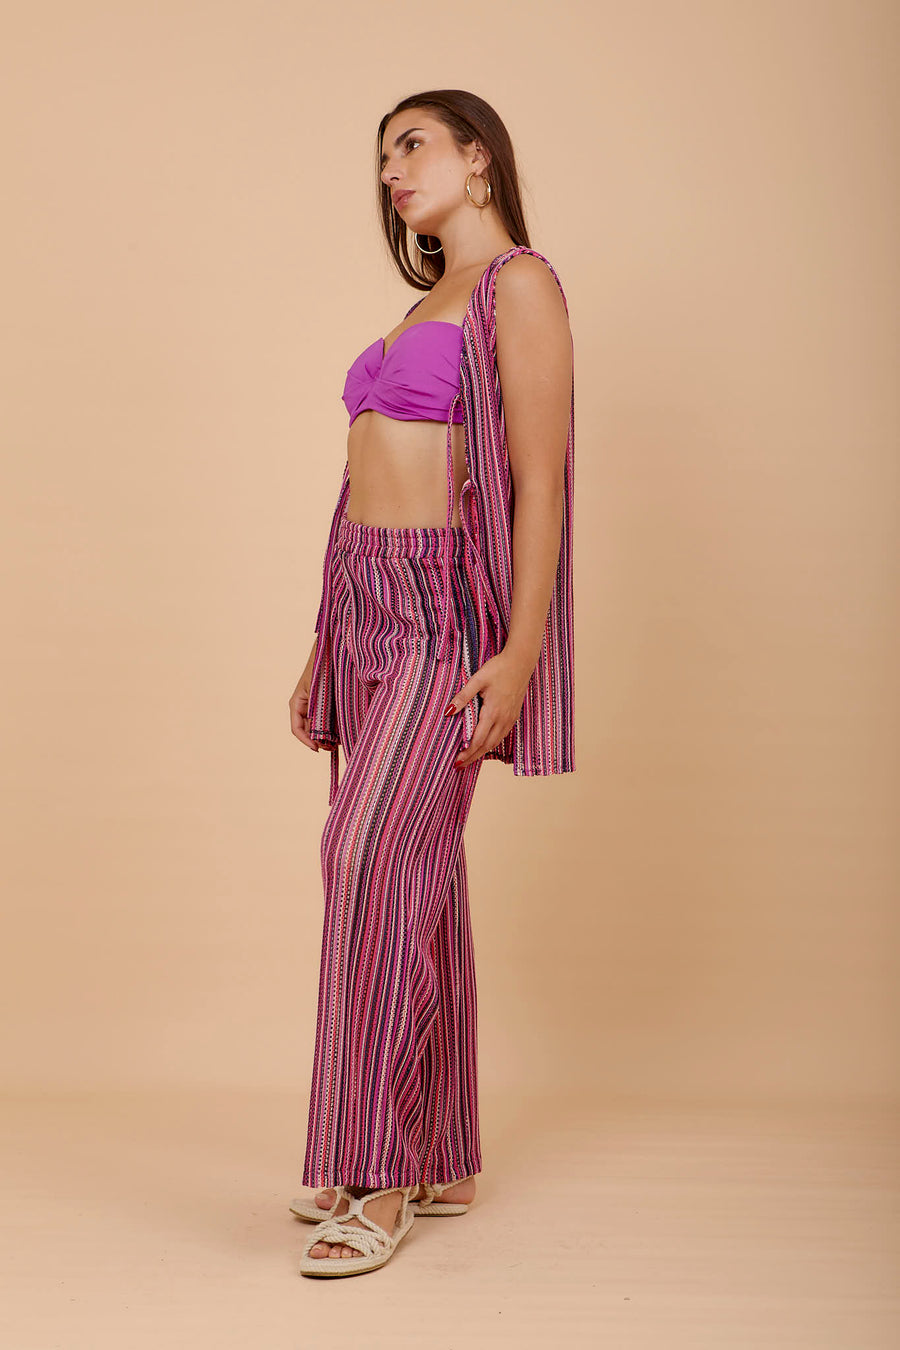 Stripes Crochet Pants in Pinks (matching vest available)